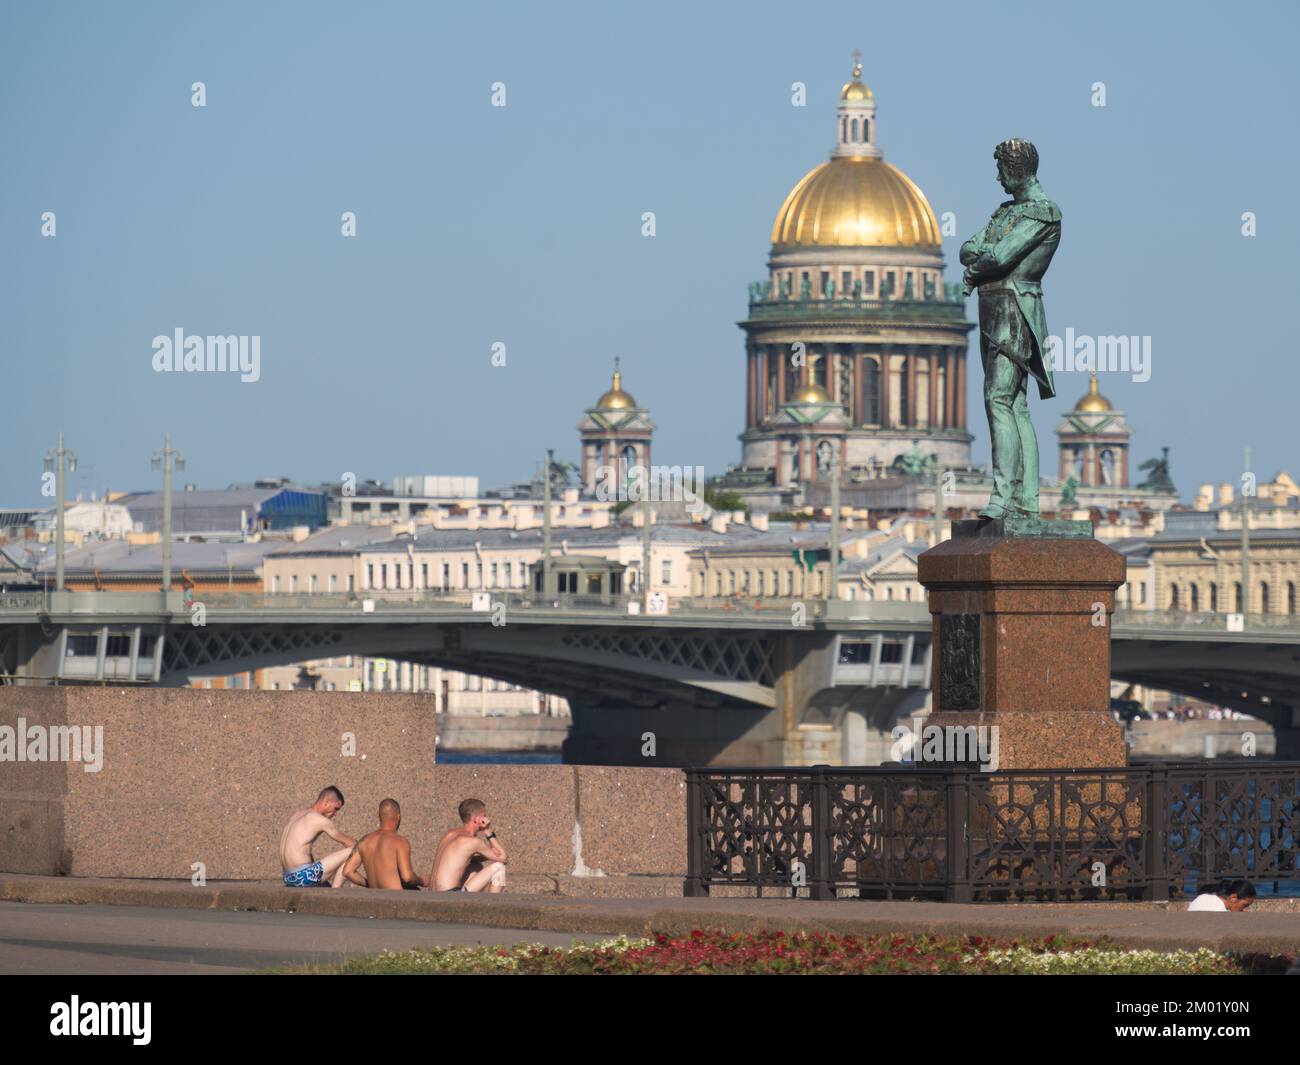 Summer heat in St. Petersburg, Russia: young people sitting at the monument to Ivan Krusenstern after bathing in Neva river Stock Photo